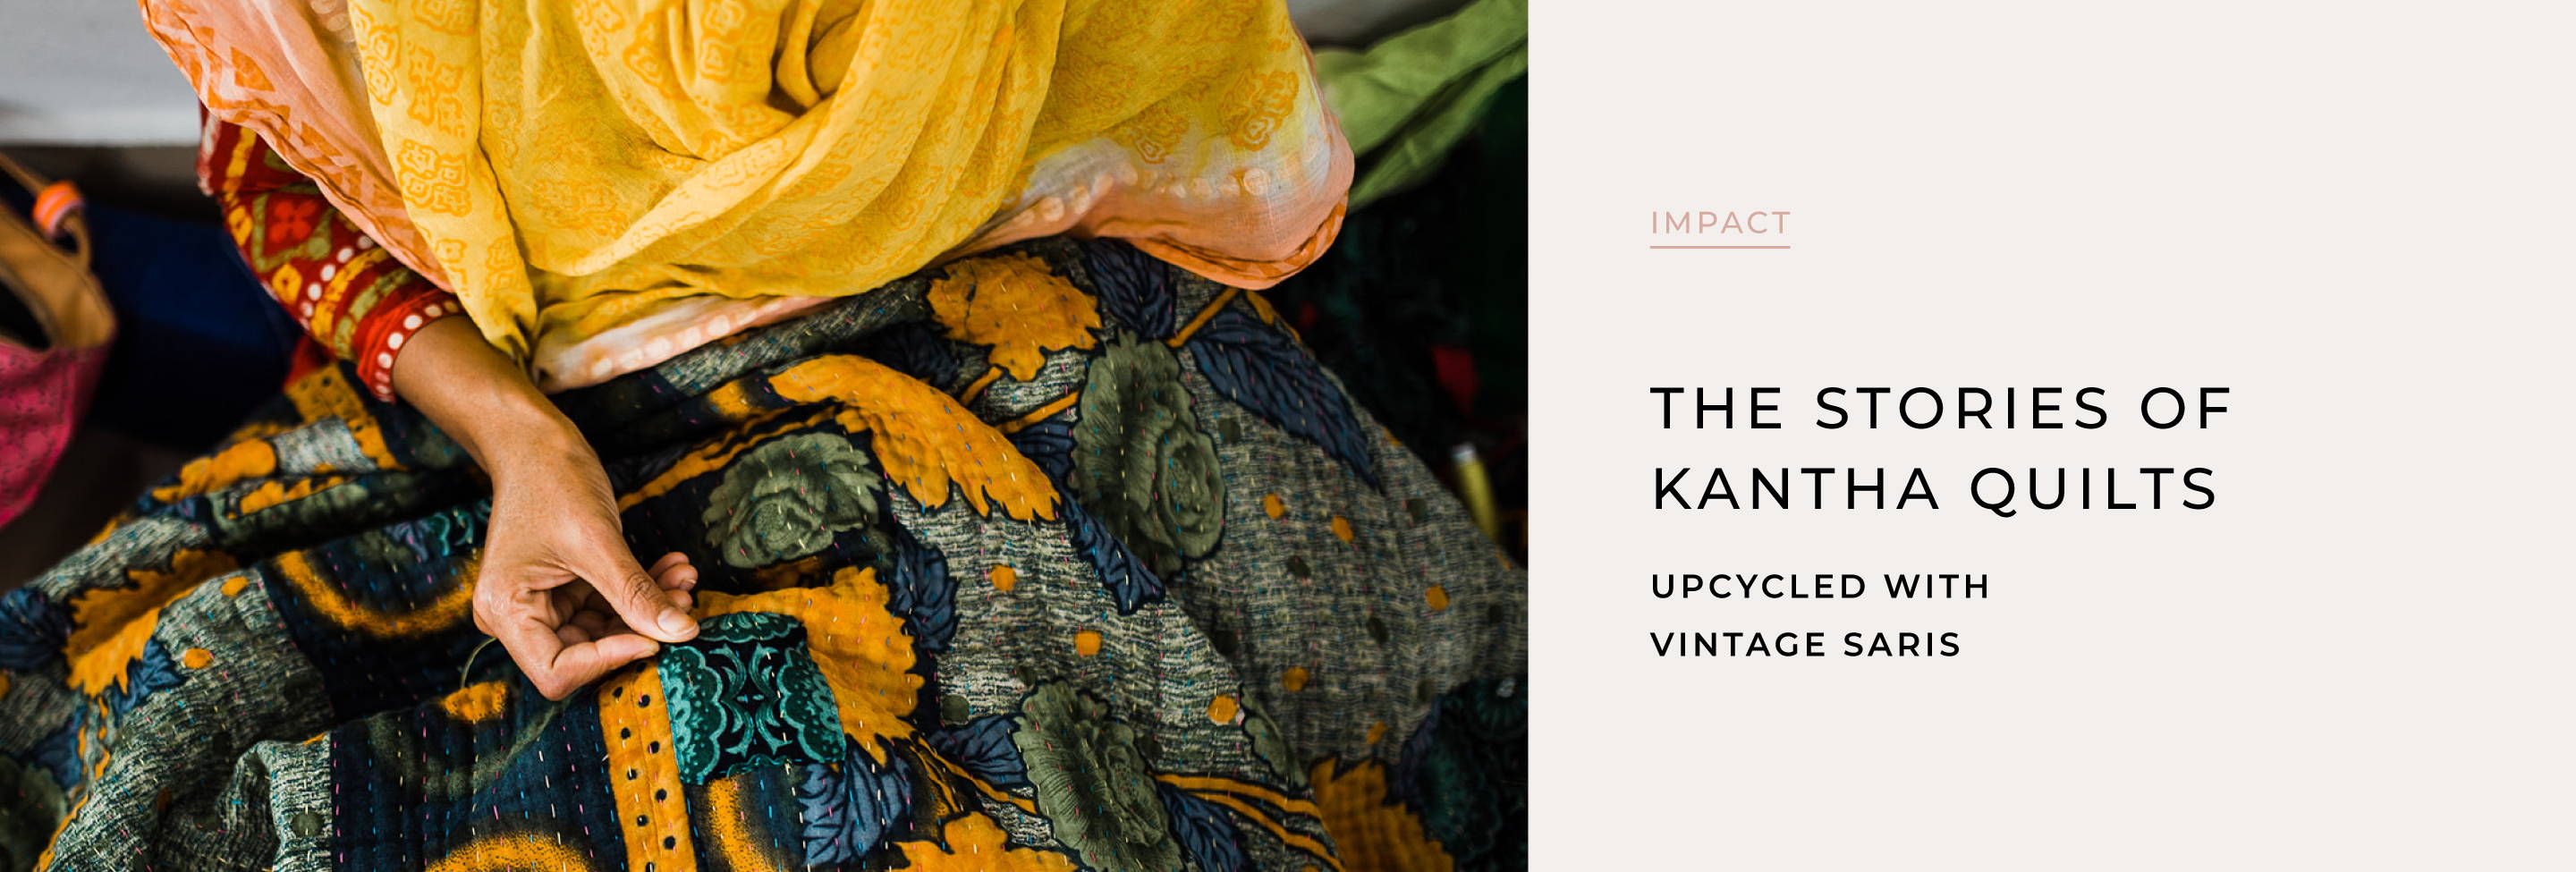 The Story of Kantha Quilts | The Little Market